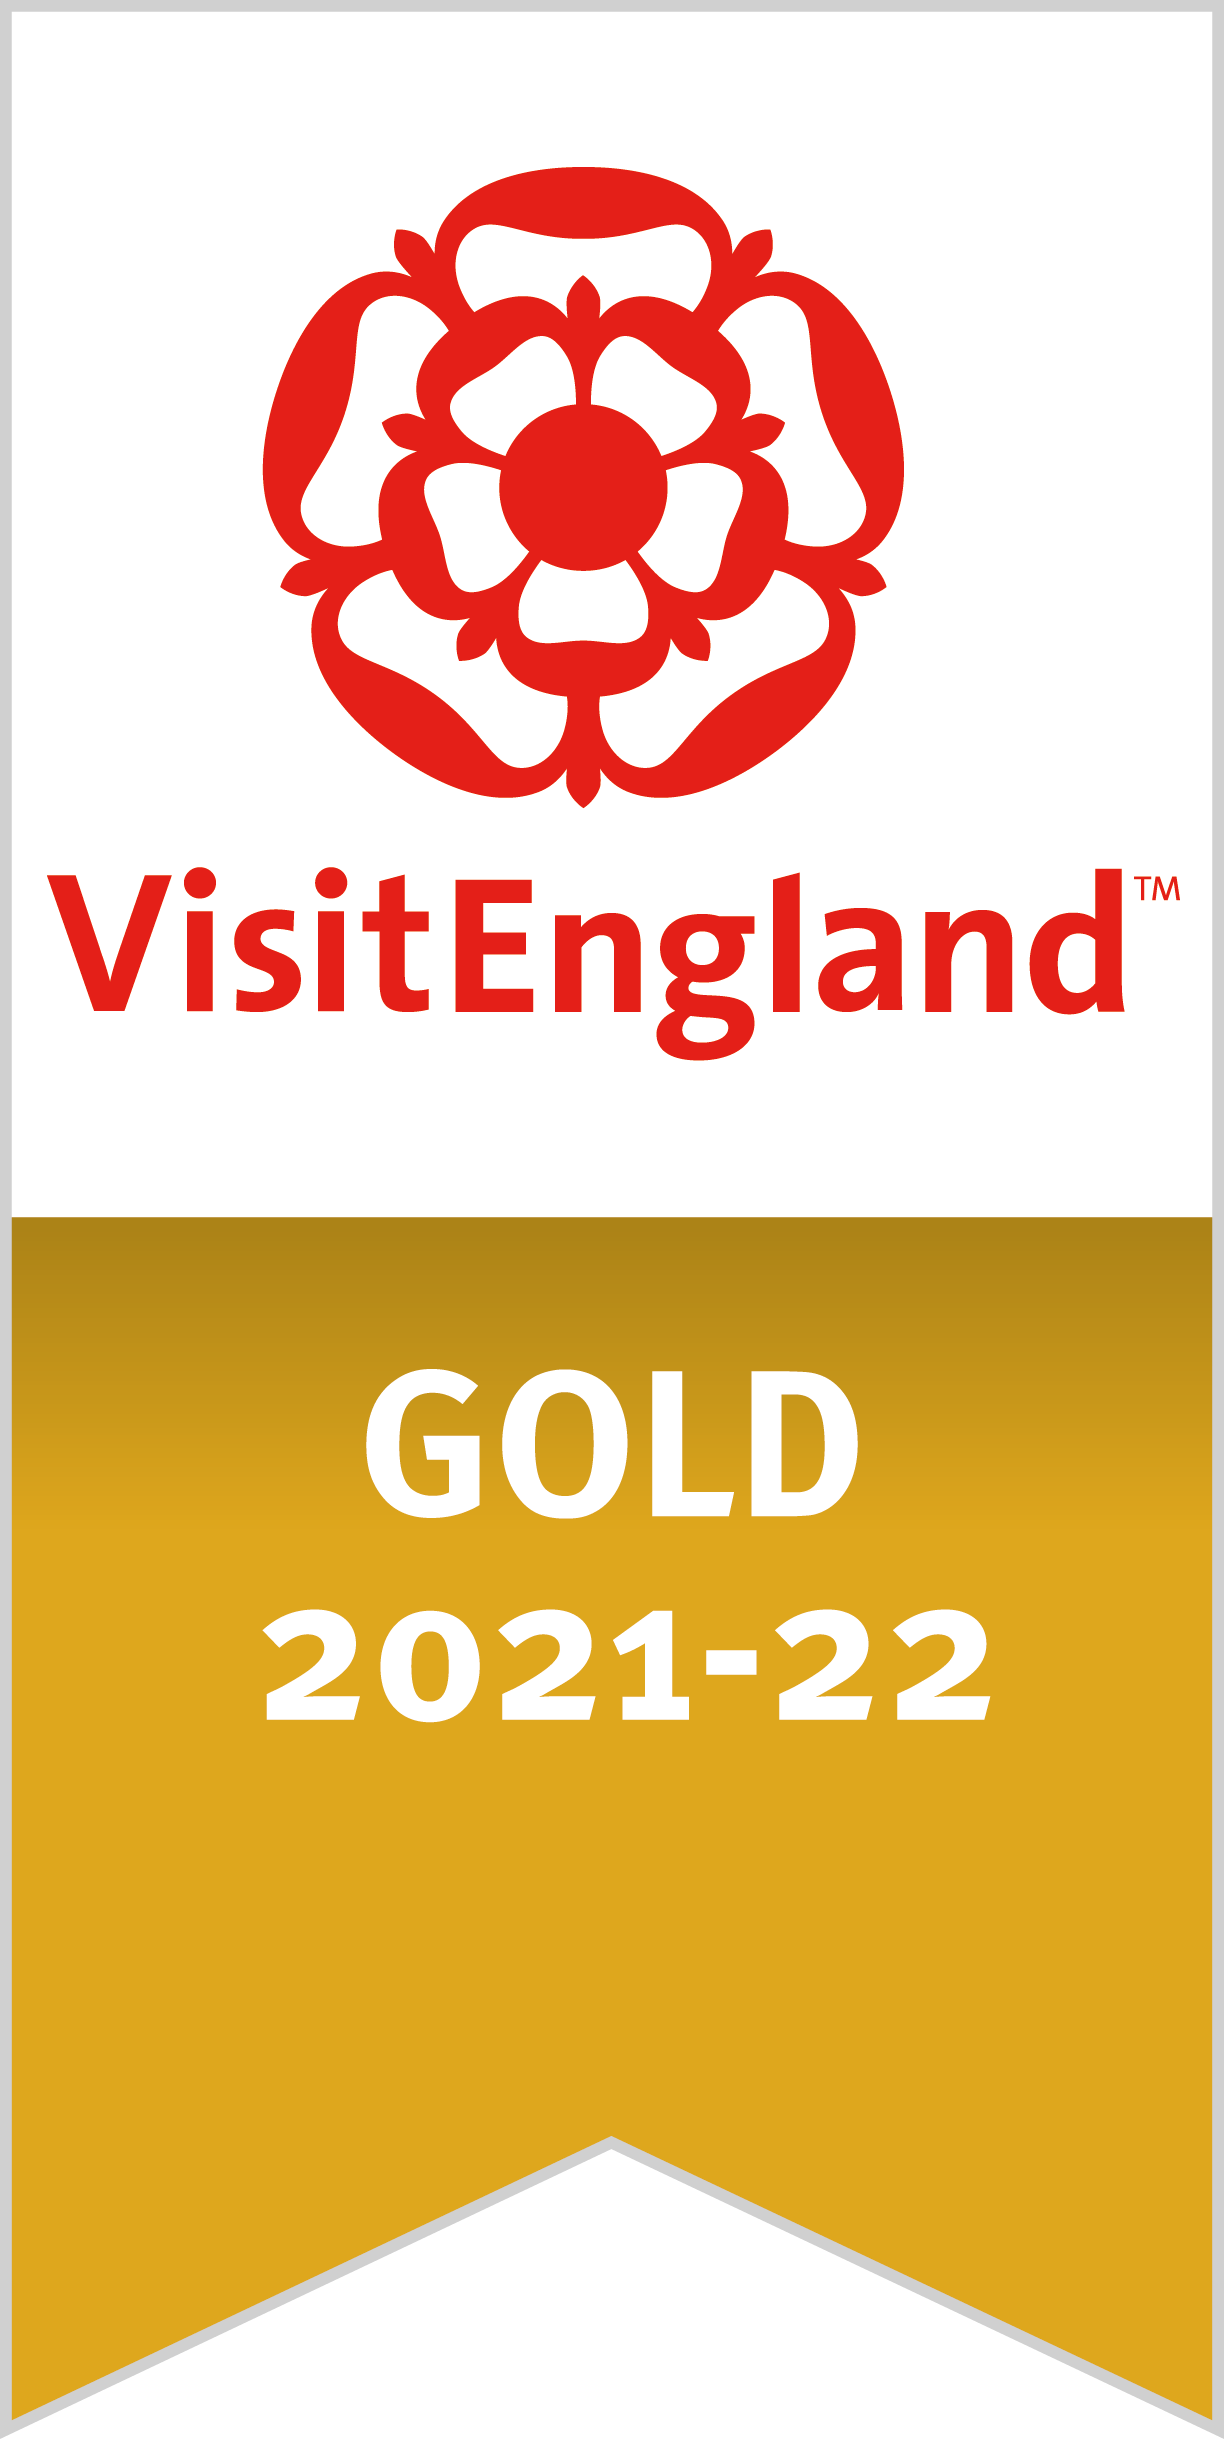 Visit England red rose logo above a gold banner. Text reads GOLD 2021-22